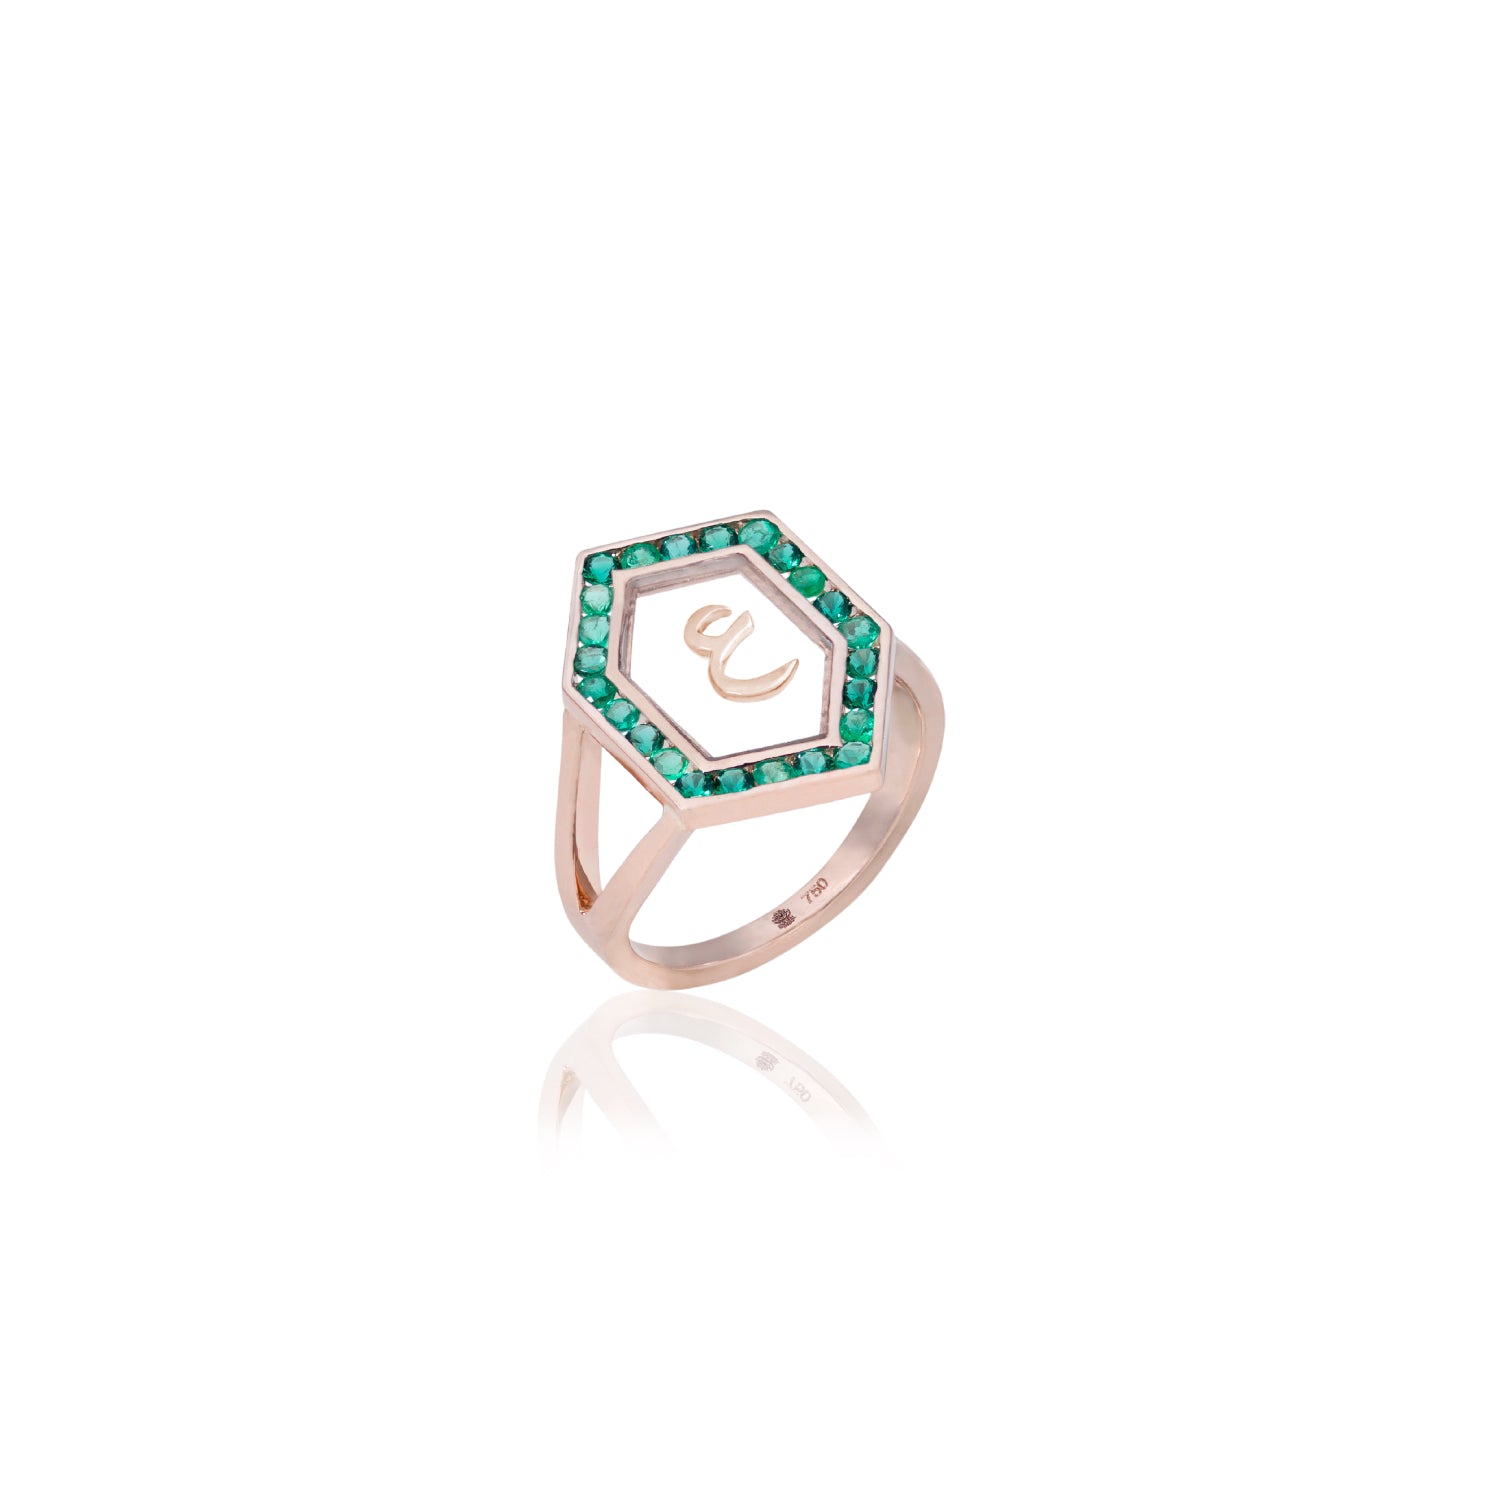 Qamoos 1.0 Letter ع Emerald Ring in Rose Gold